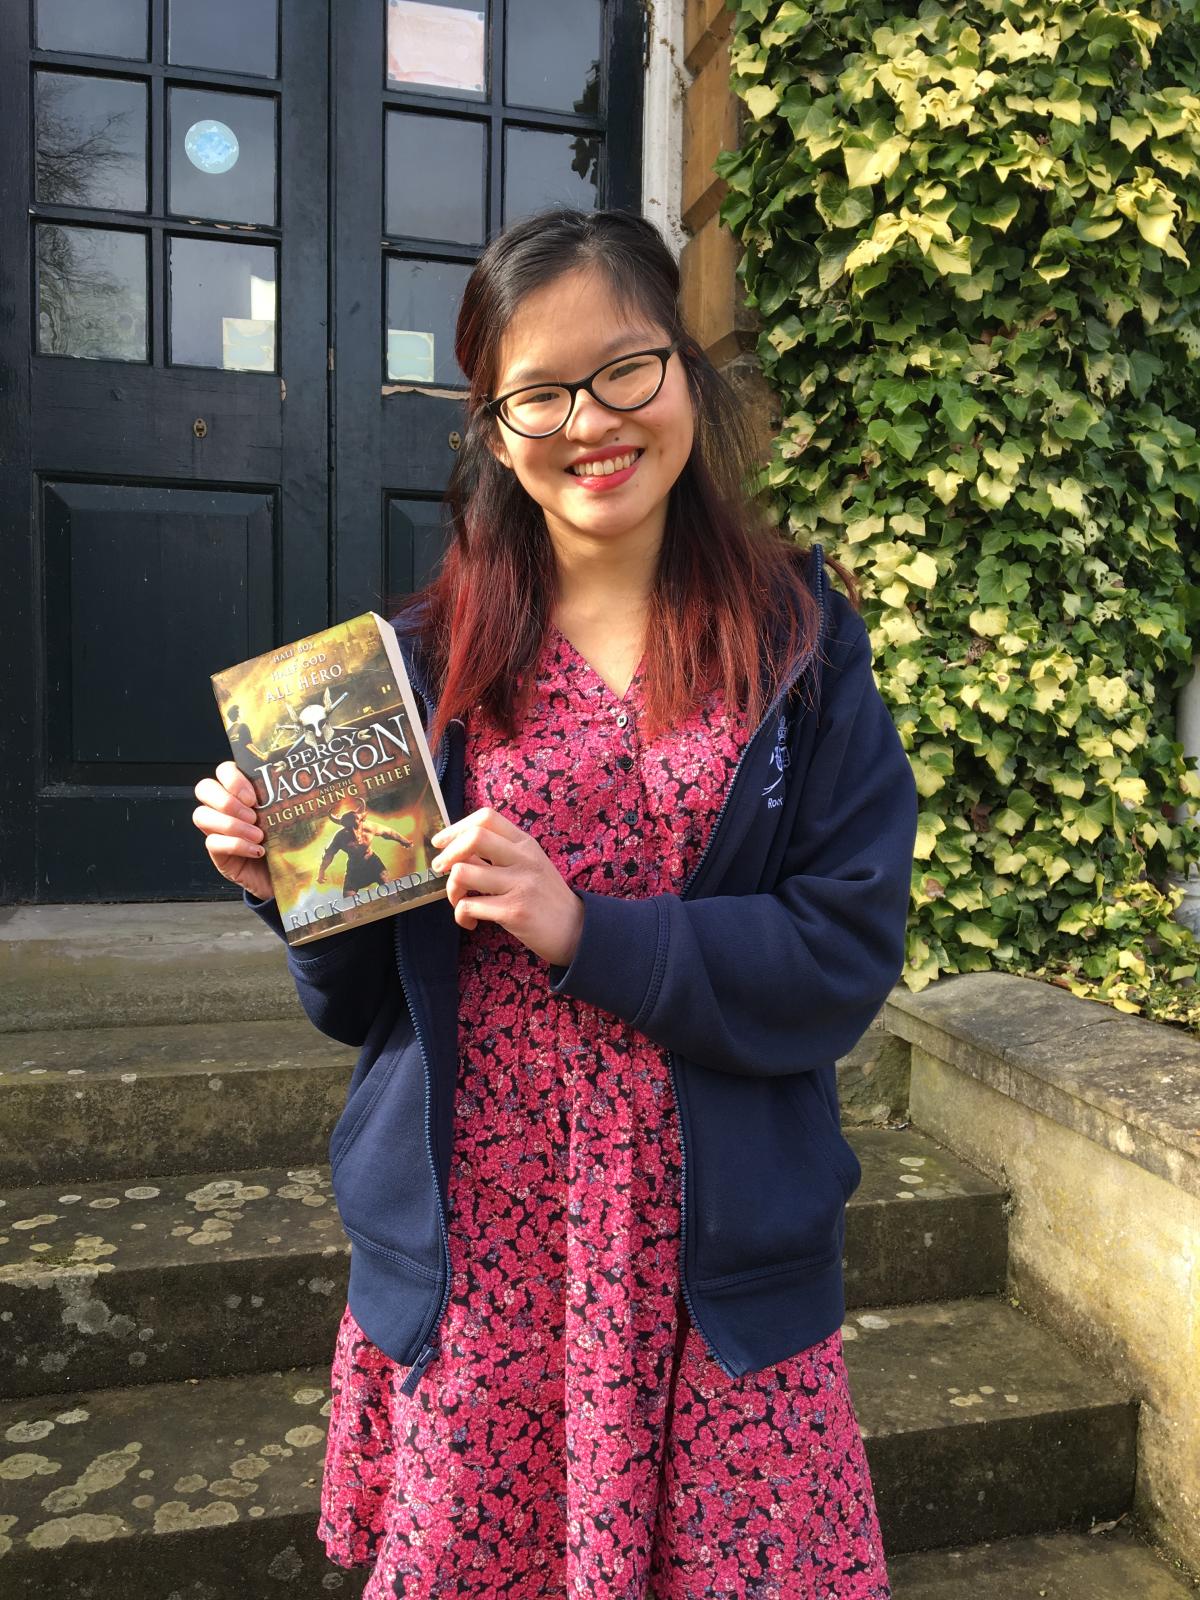 Our undergraduate student Nina with her book suggestion for World Book Day